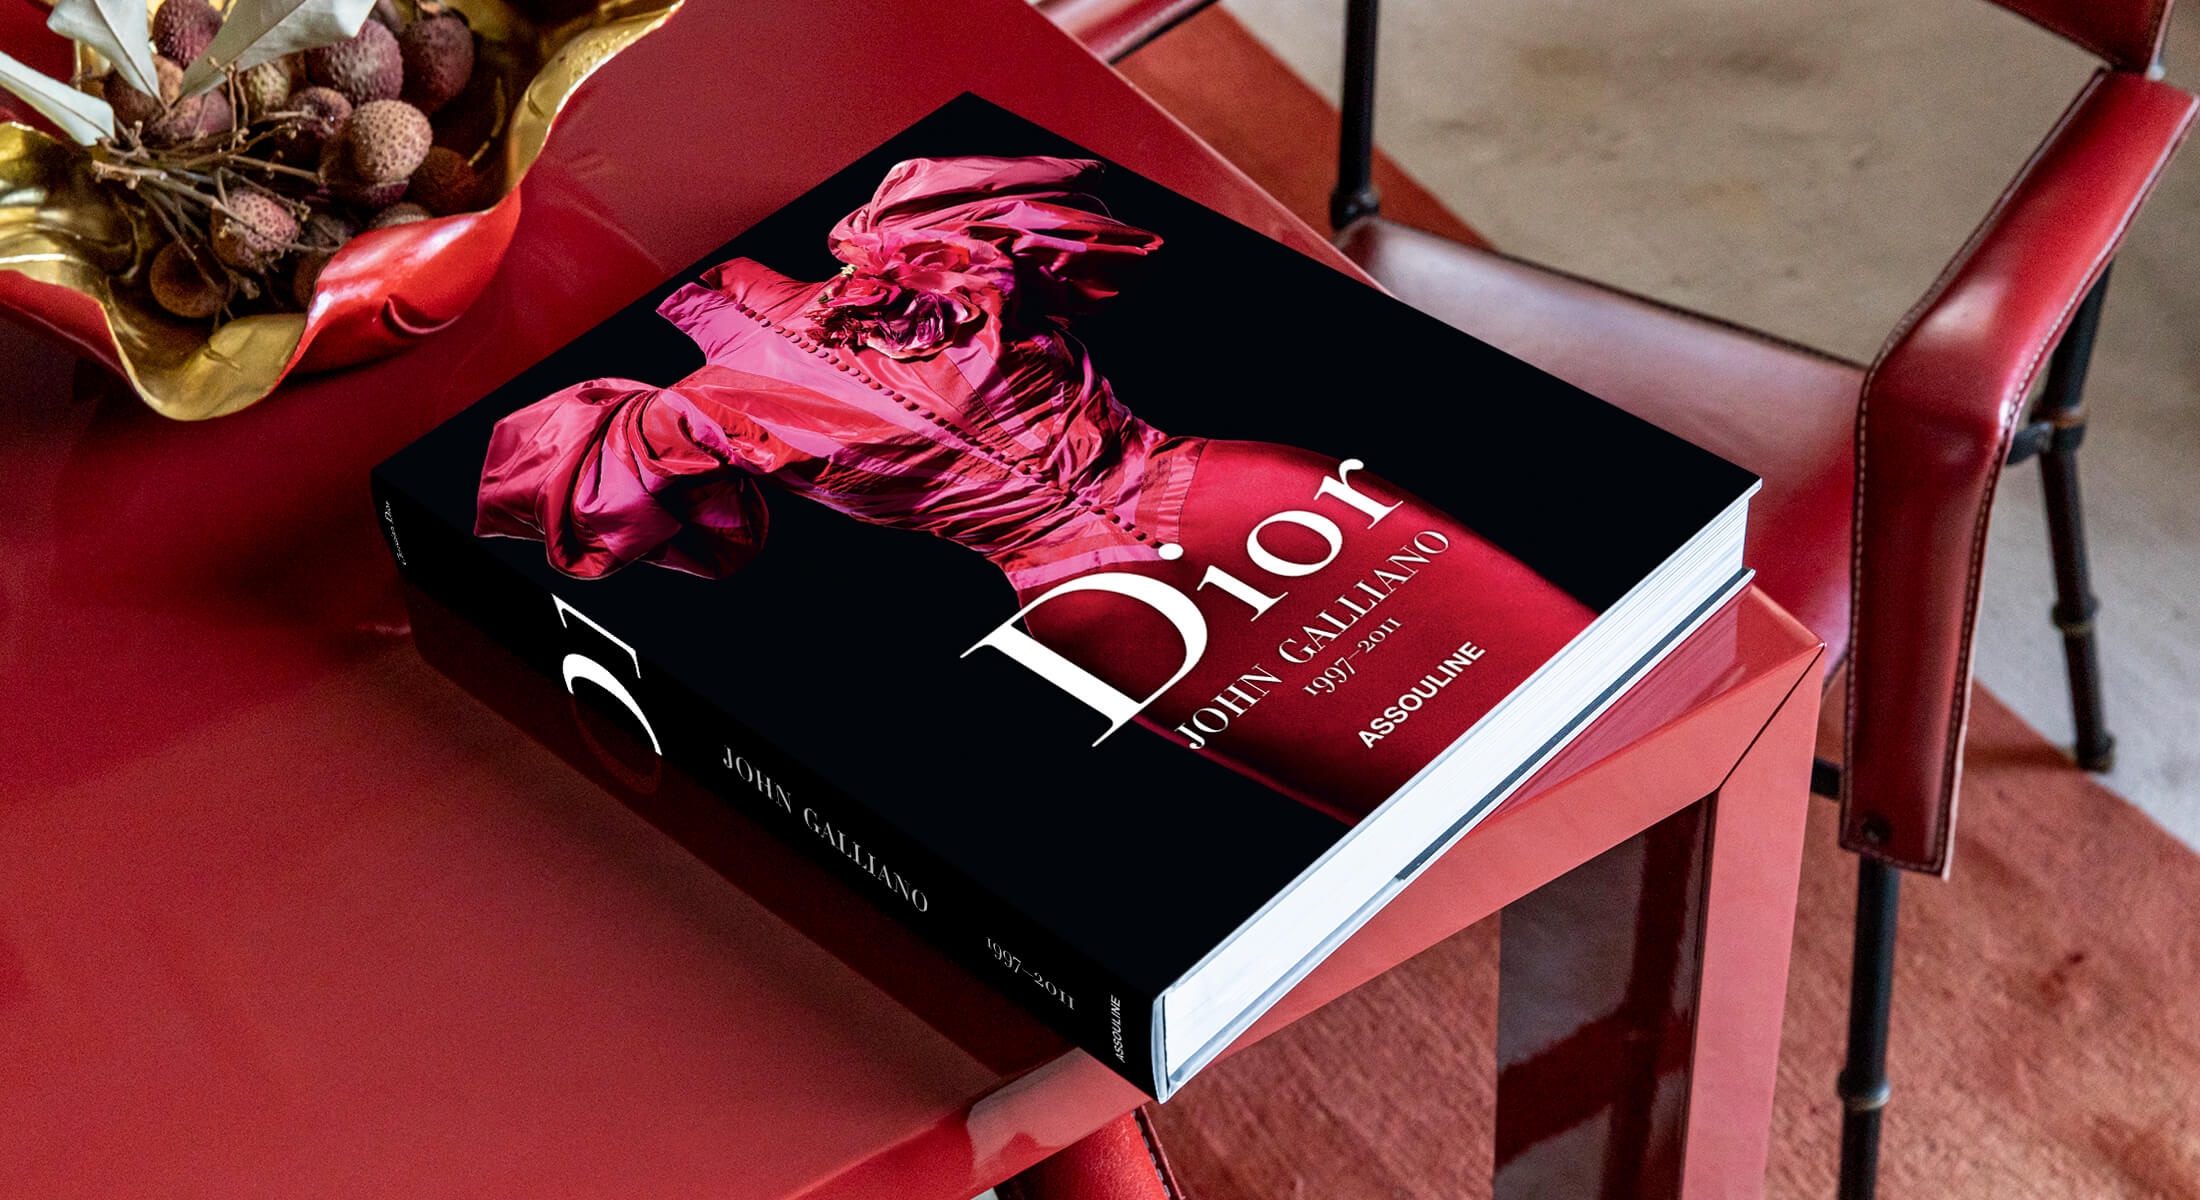 Dior by John Galliano by Andrew Bolton - Coffee Table Book